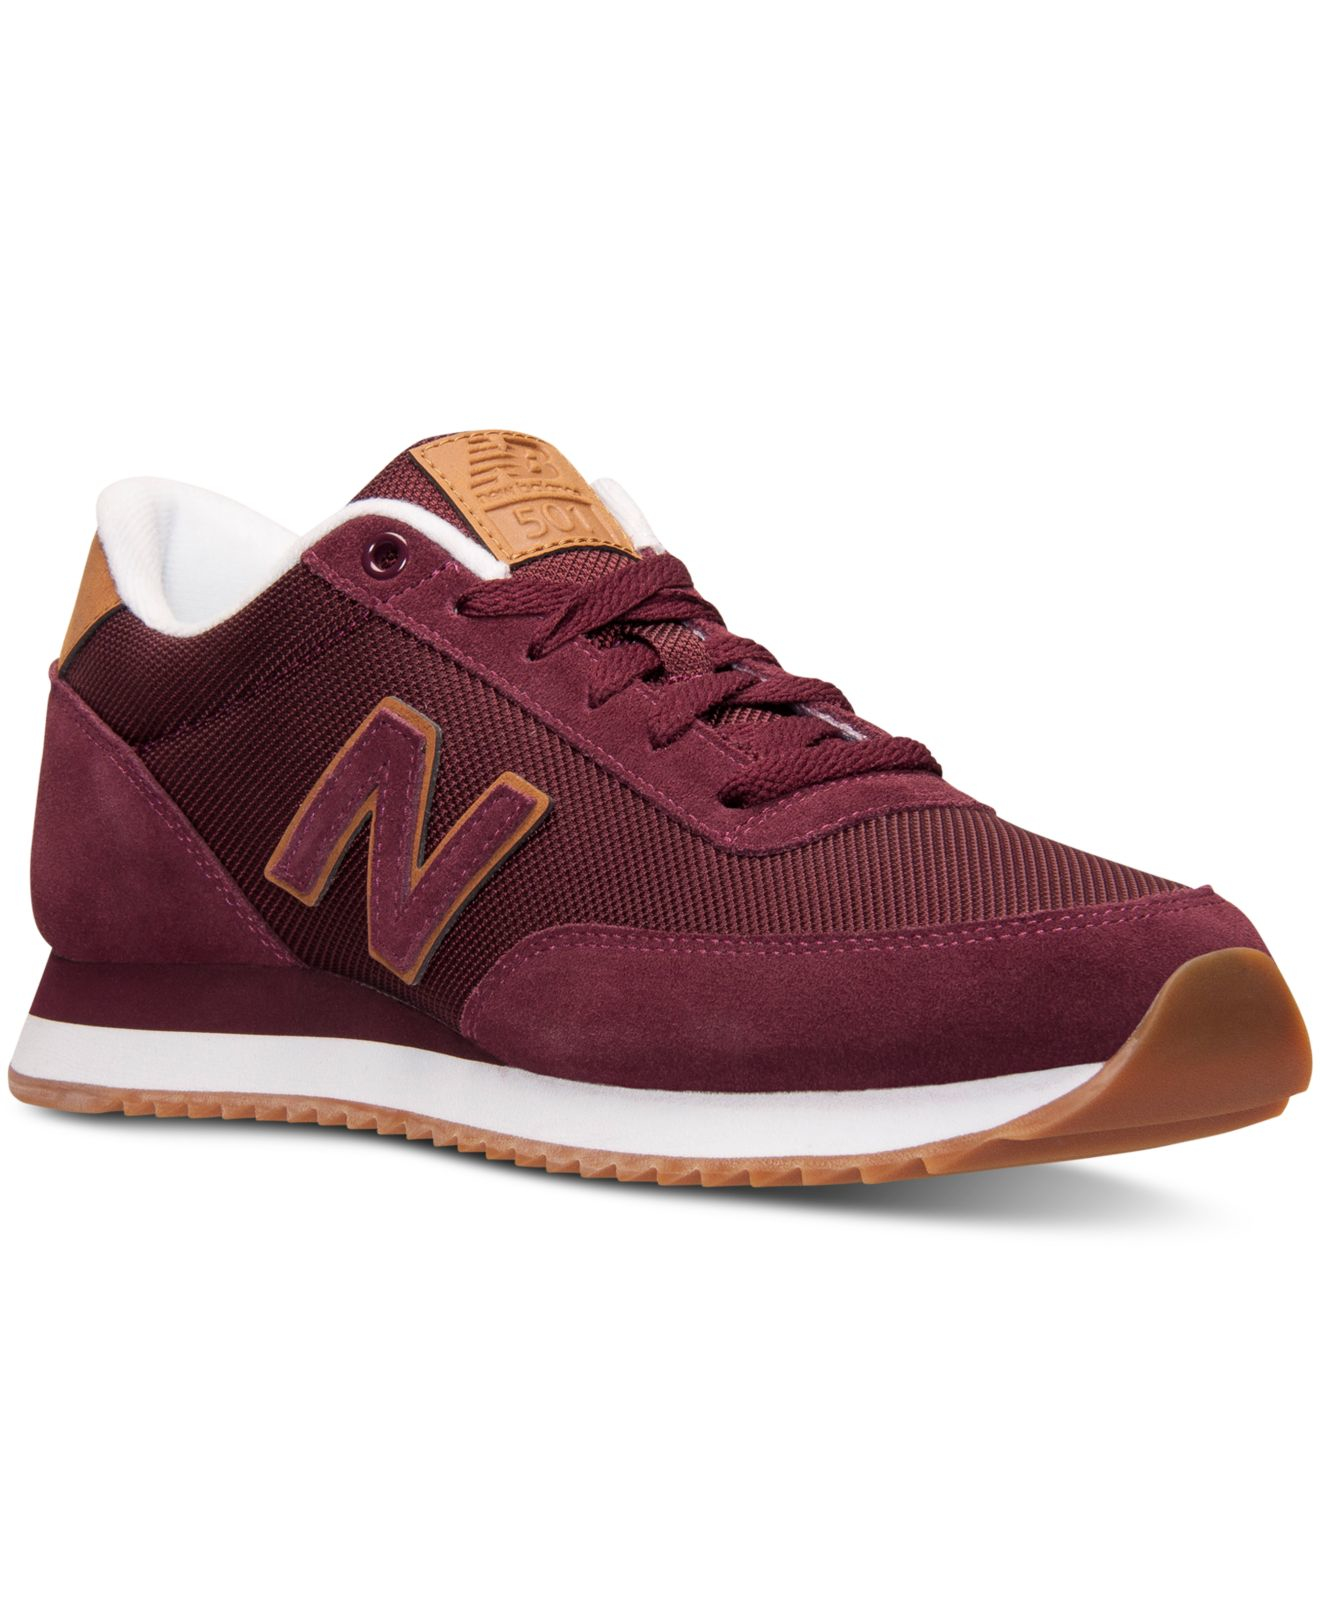 New Balance Suede Men's 501 Ripple Sole Casual Sneakers From Finish Line in  Burgundy (Purple) for Men - Lyst